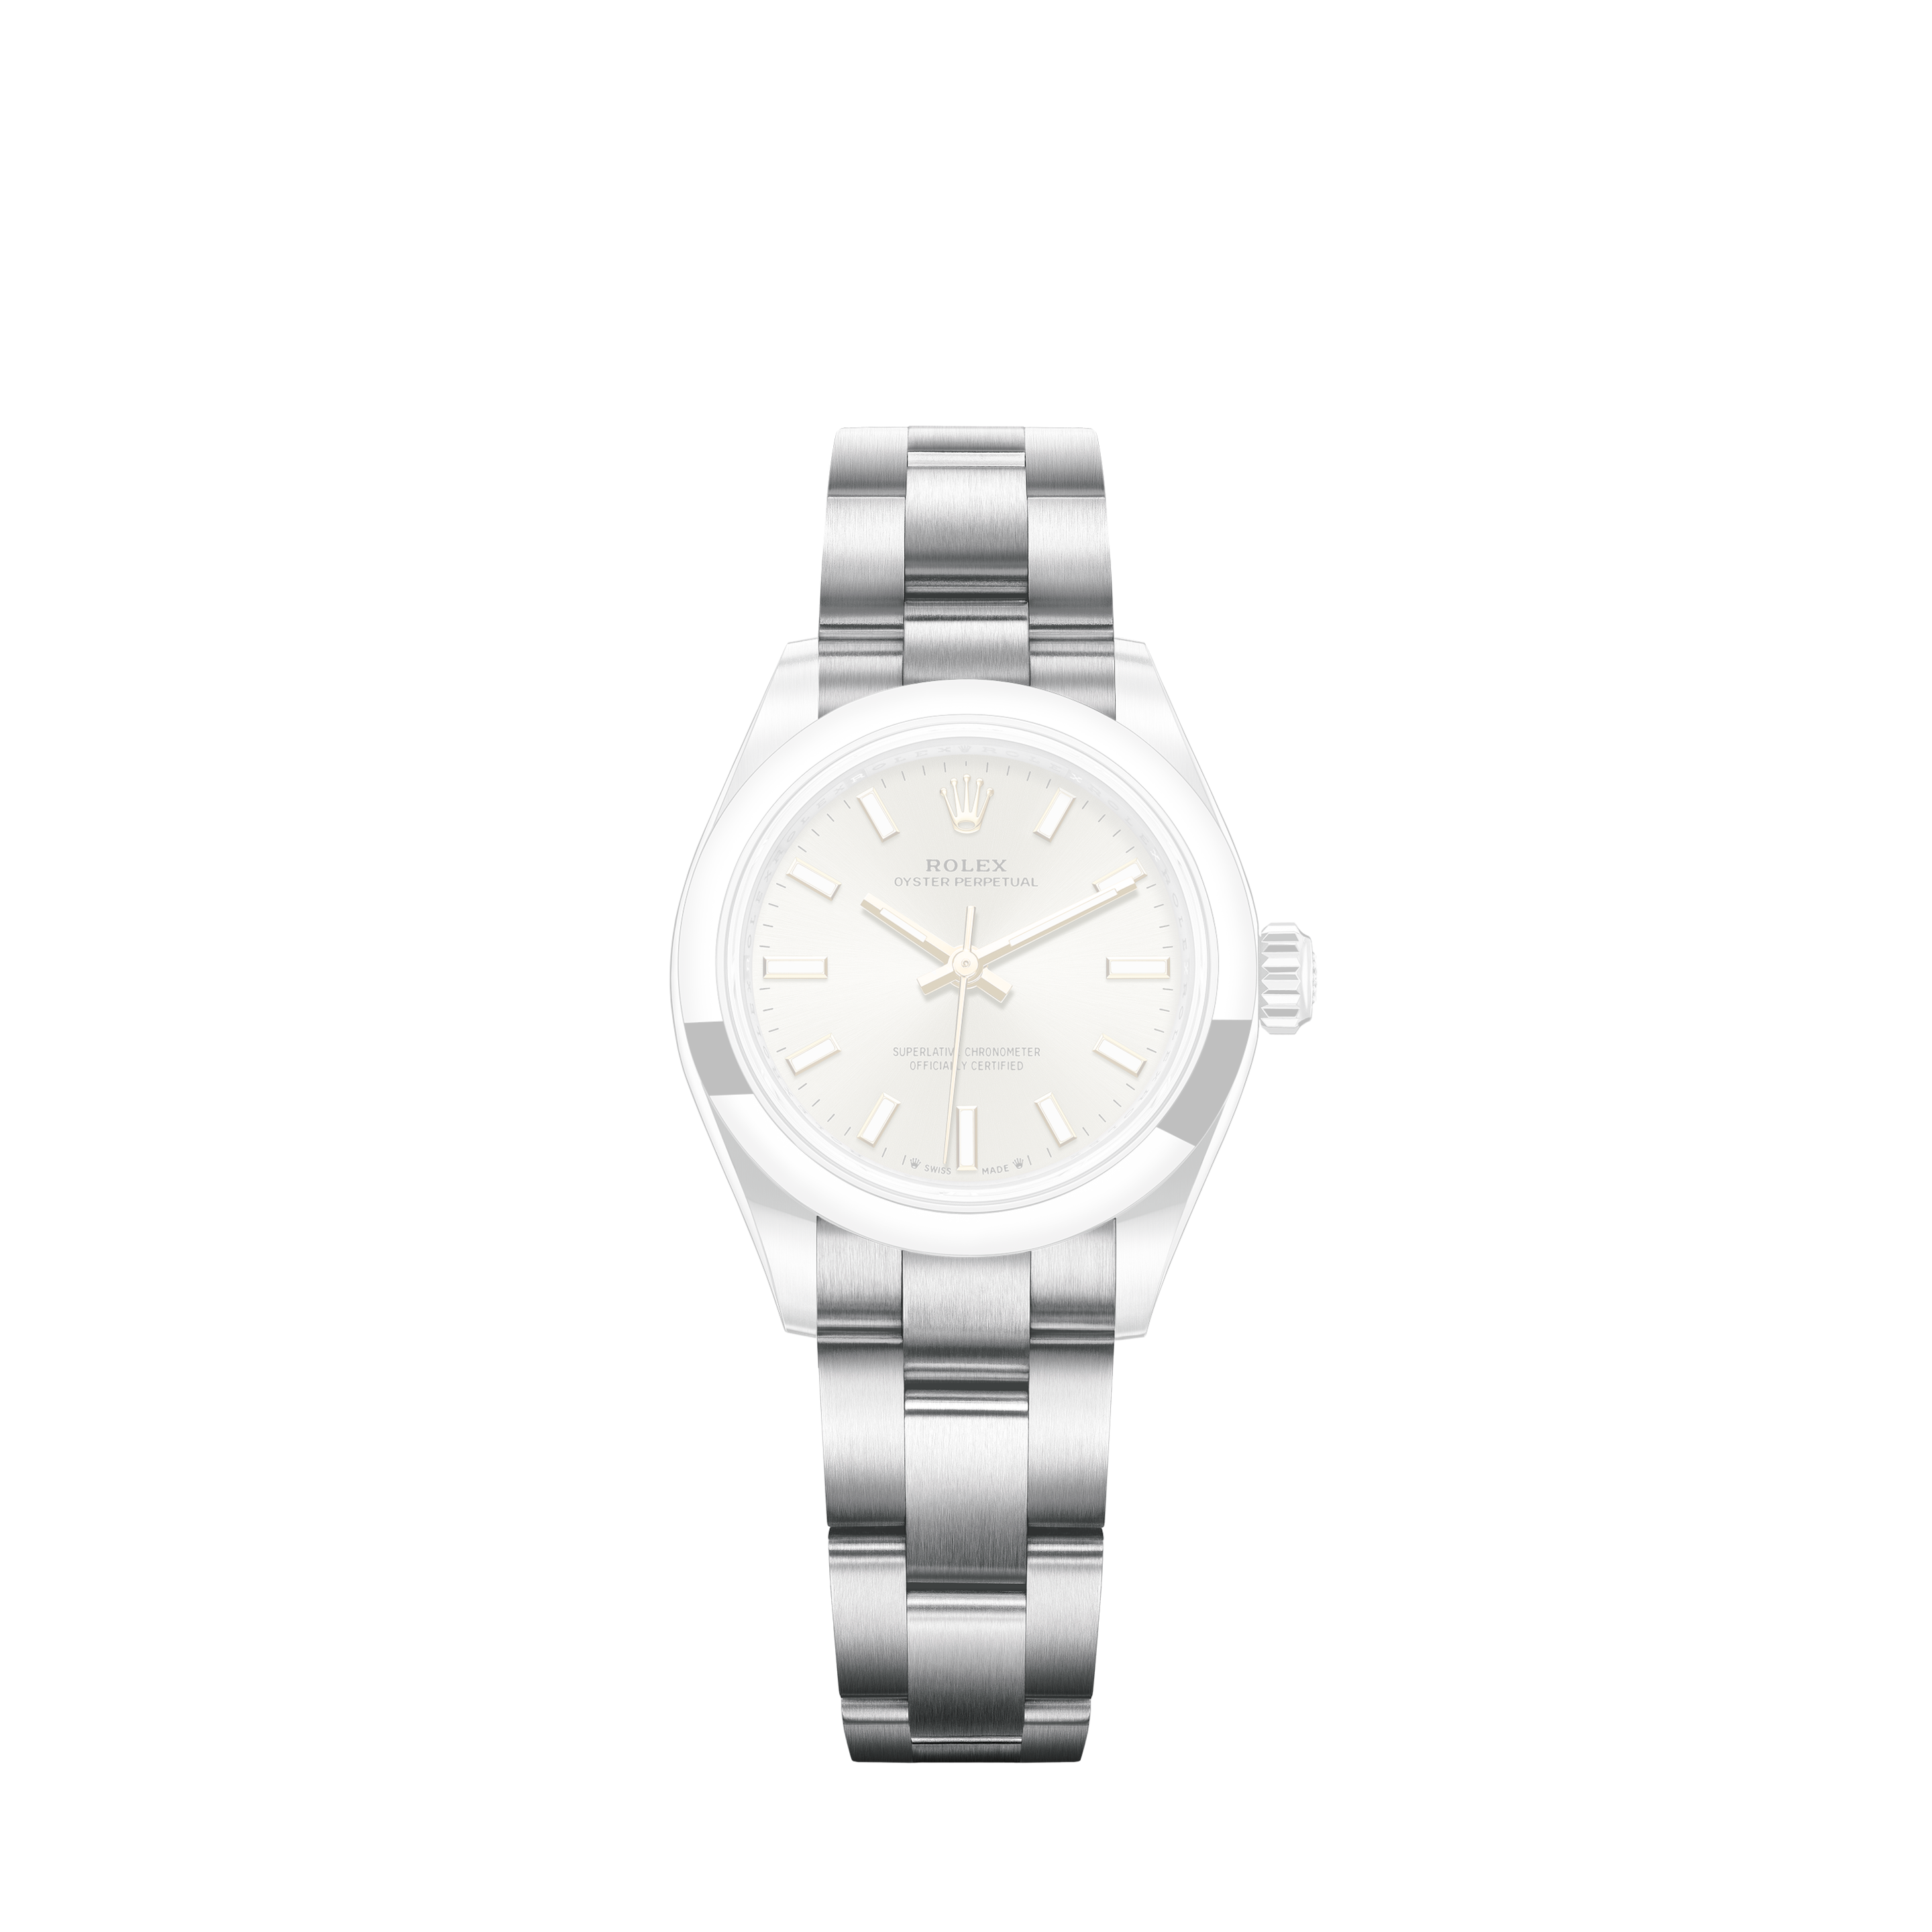 Rolex Women's Rolex 31mm Datejust Stainless Steel White Color Dial with Diamond Accent RT Deployment buckle